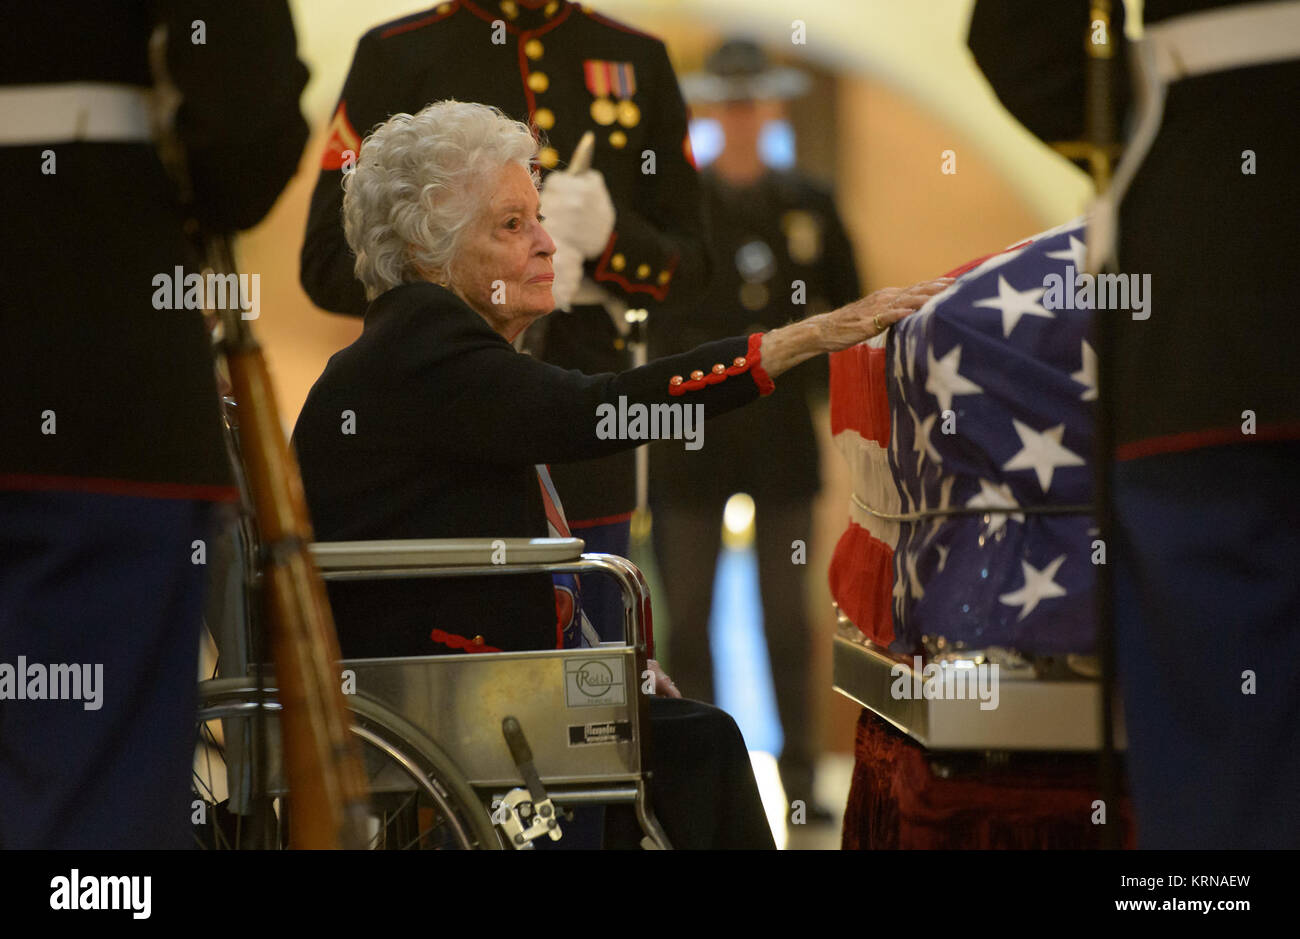 Annie Glenn, Widow of former astronaut and Senator John Glenn, pays her respects to her late husband as he lies in repose, under a United States Marine honor guard, in the Rotunda of the Ohio Statehouse in Columbus, Friday, Dec. 16, 2016. Photo Credit: (NASA/Bill Ingalls) John Glenn in Repose at the Ohio Statehouse (NHQ201612160009) Stock Photo